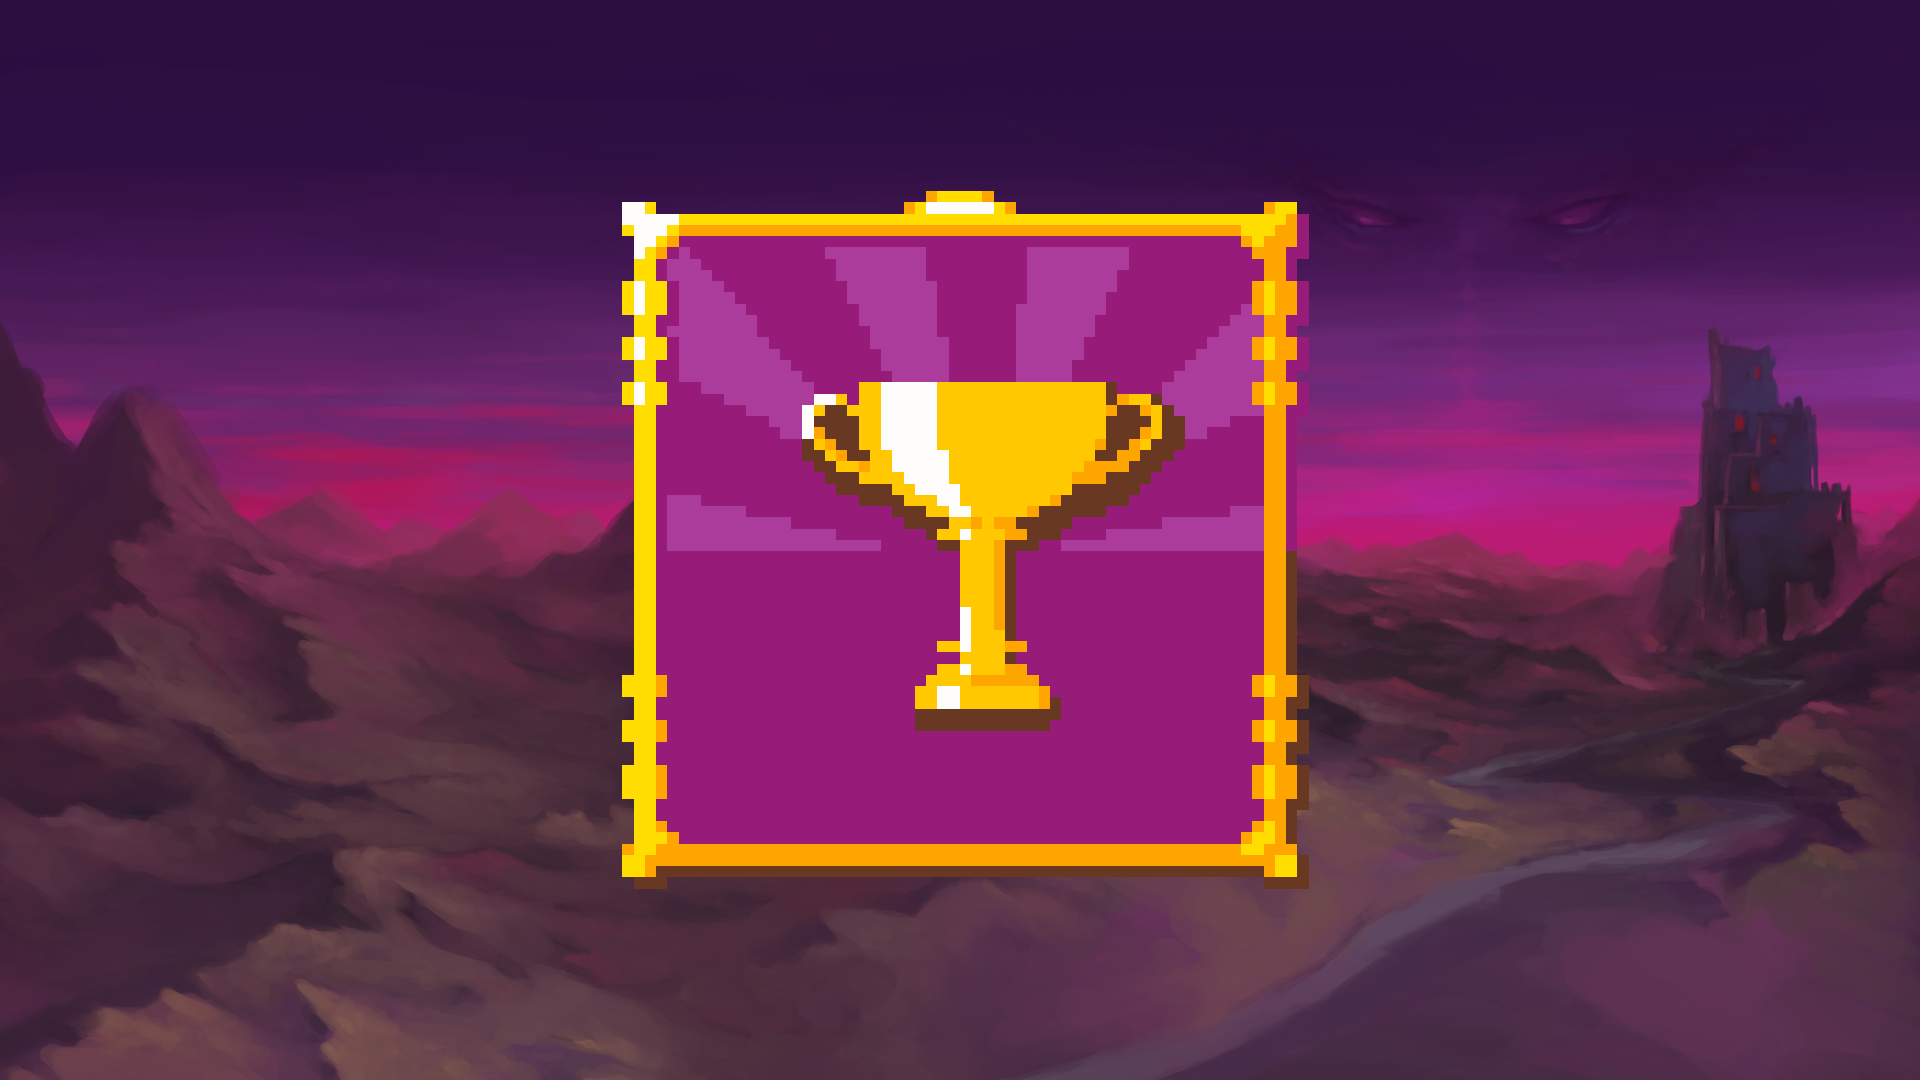 Icon for Victory!